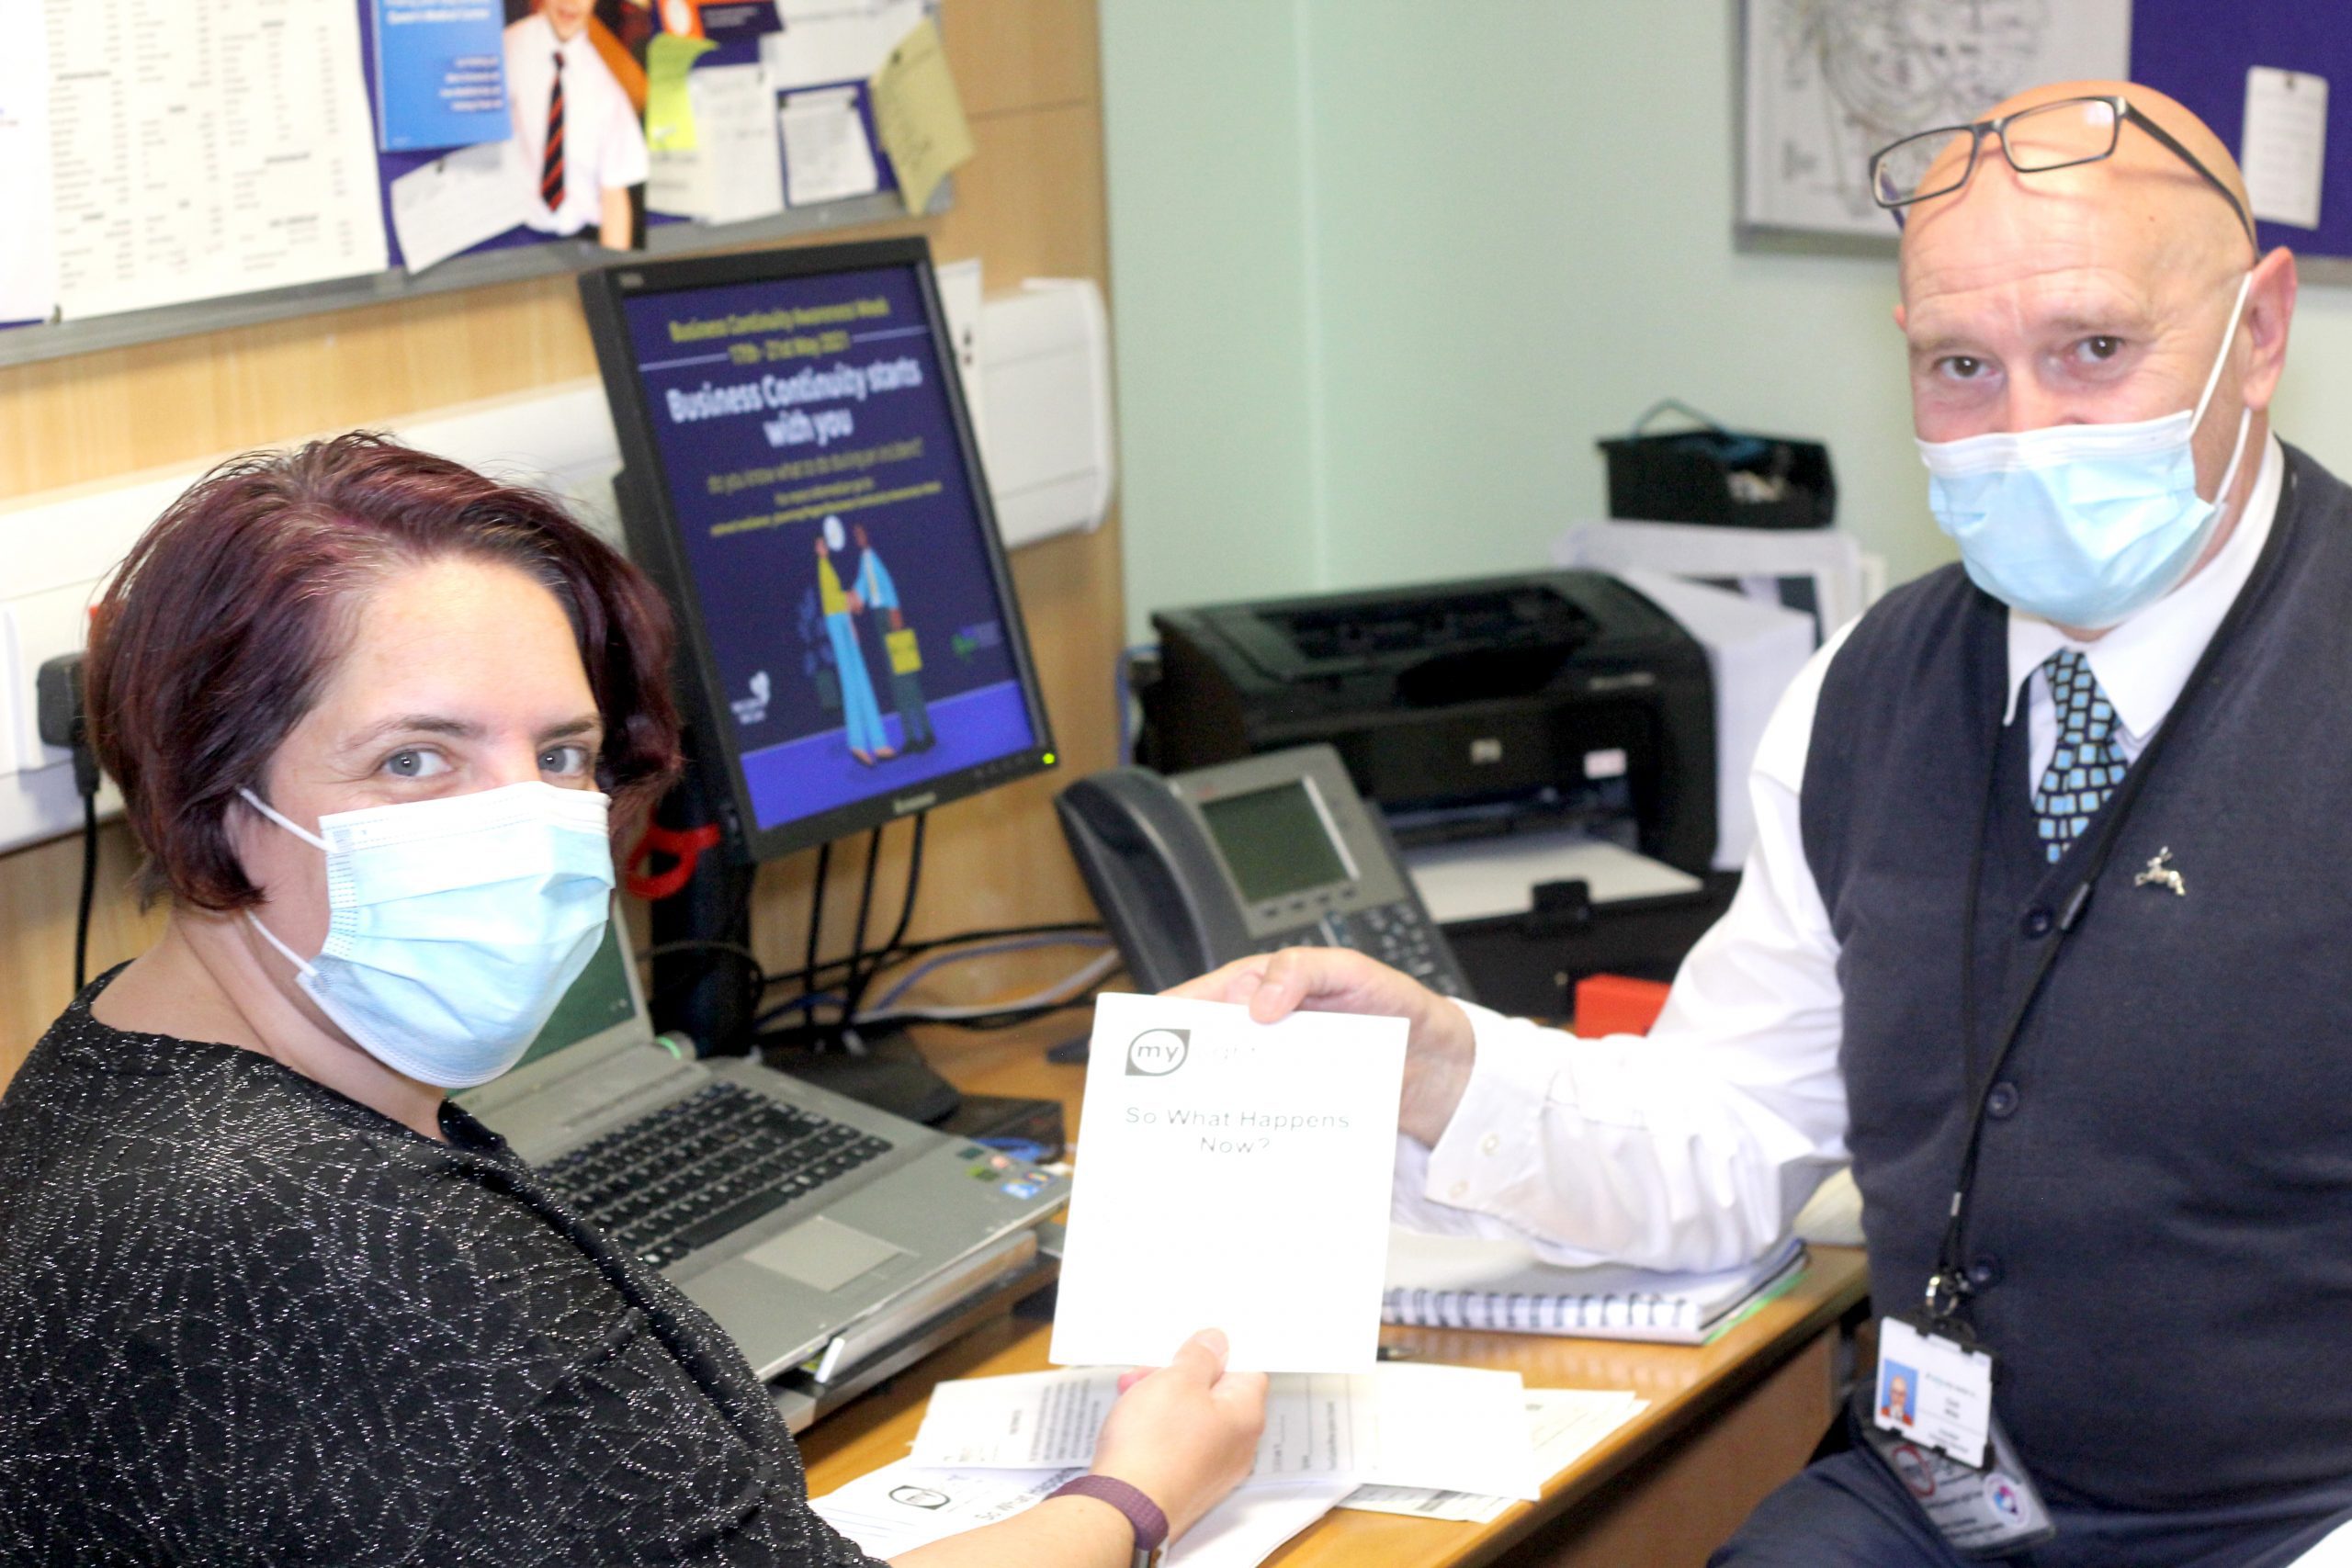 Eye Clinic Liaison Officer ECLO handing a woman a leaflet. Both are wearing face coverings.